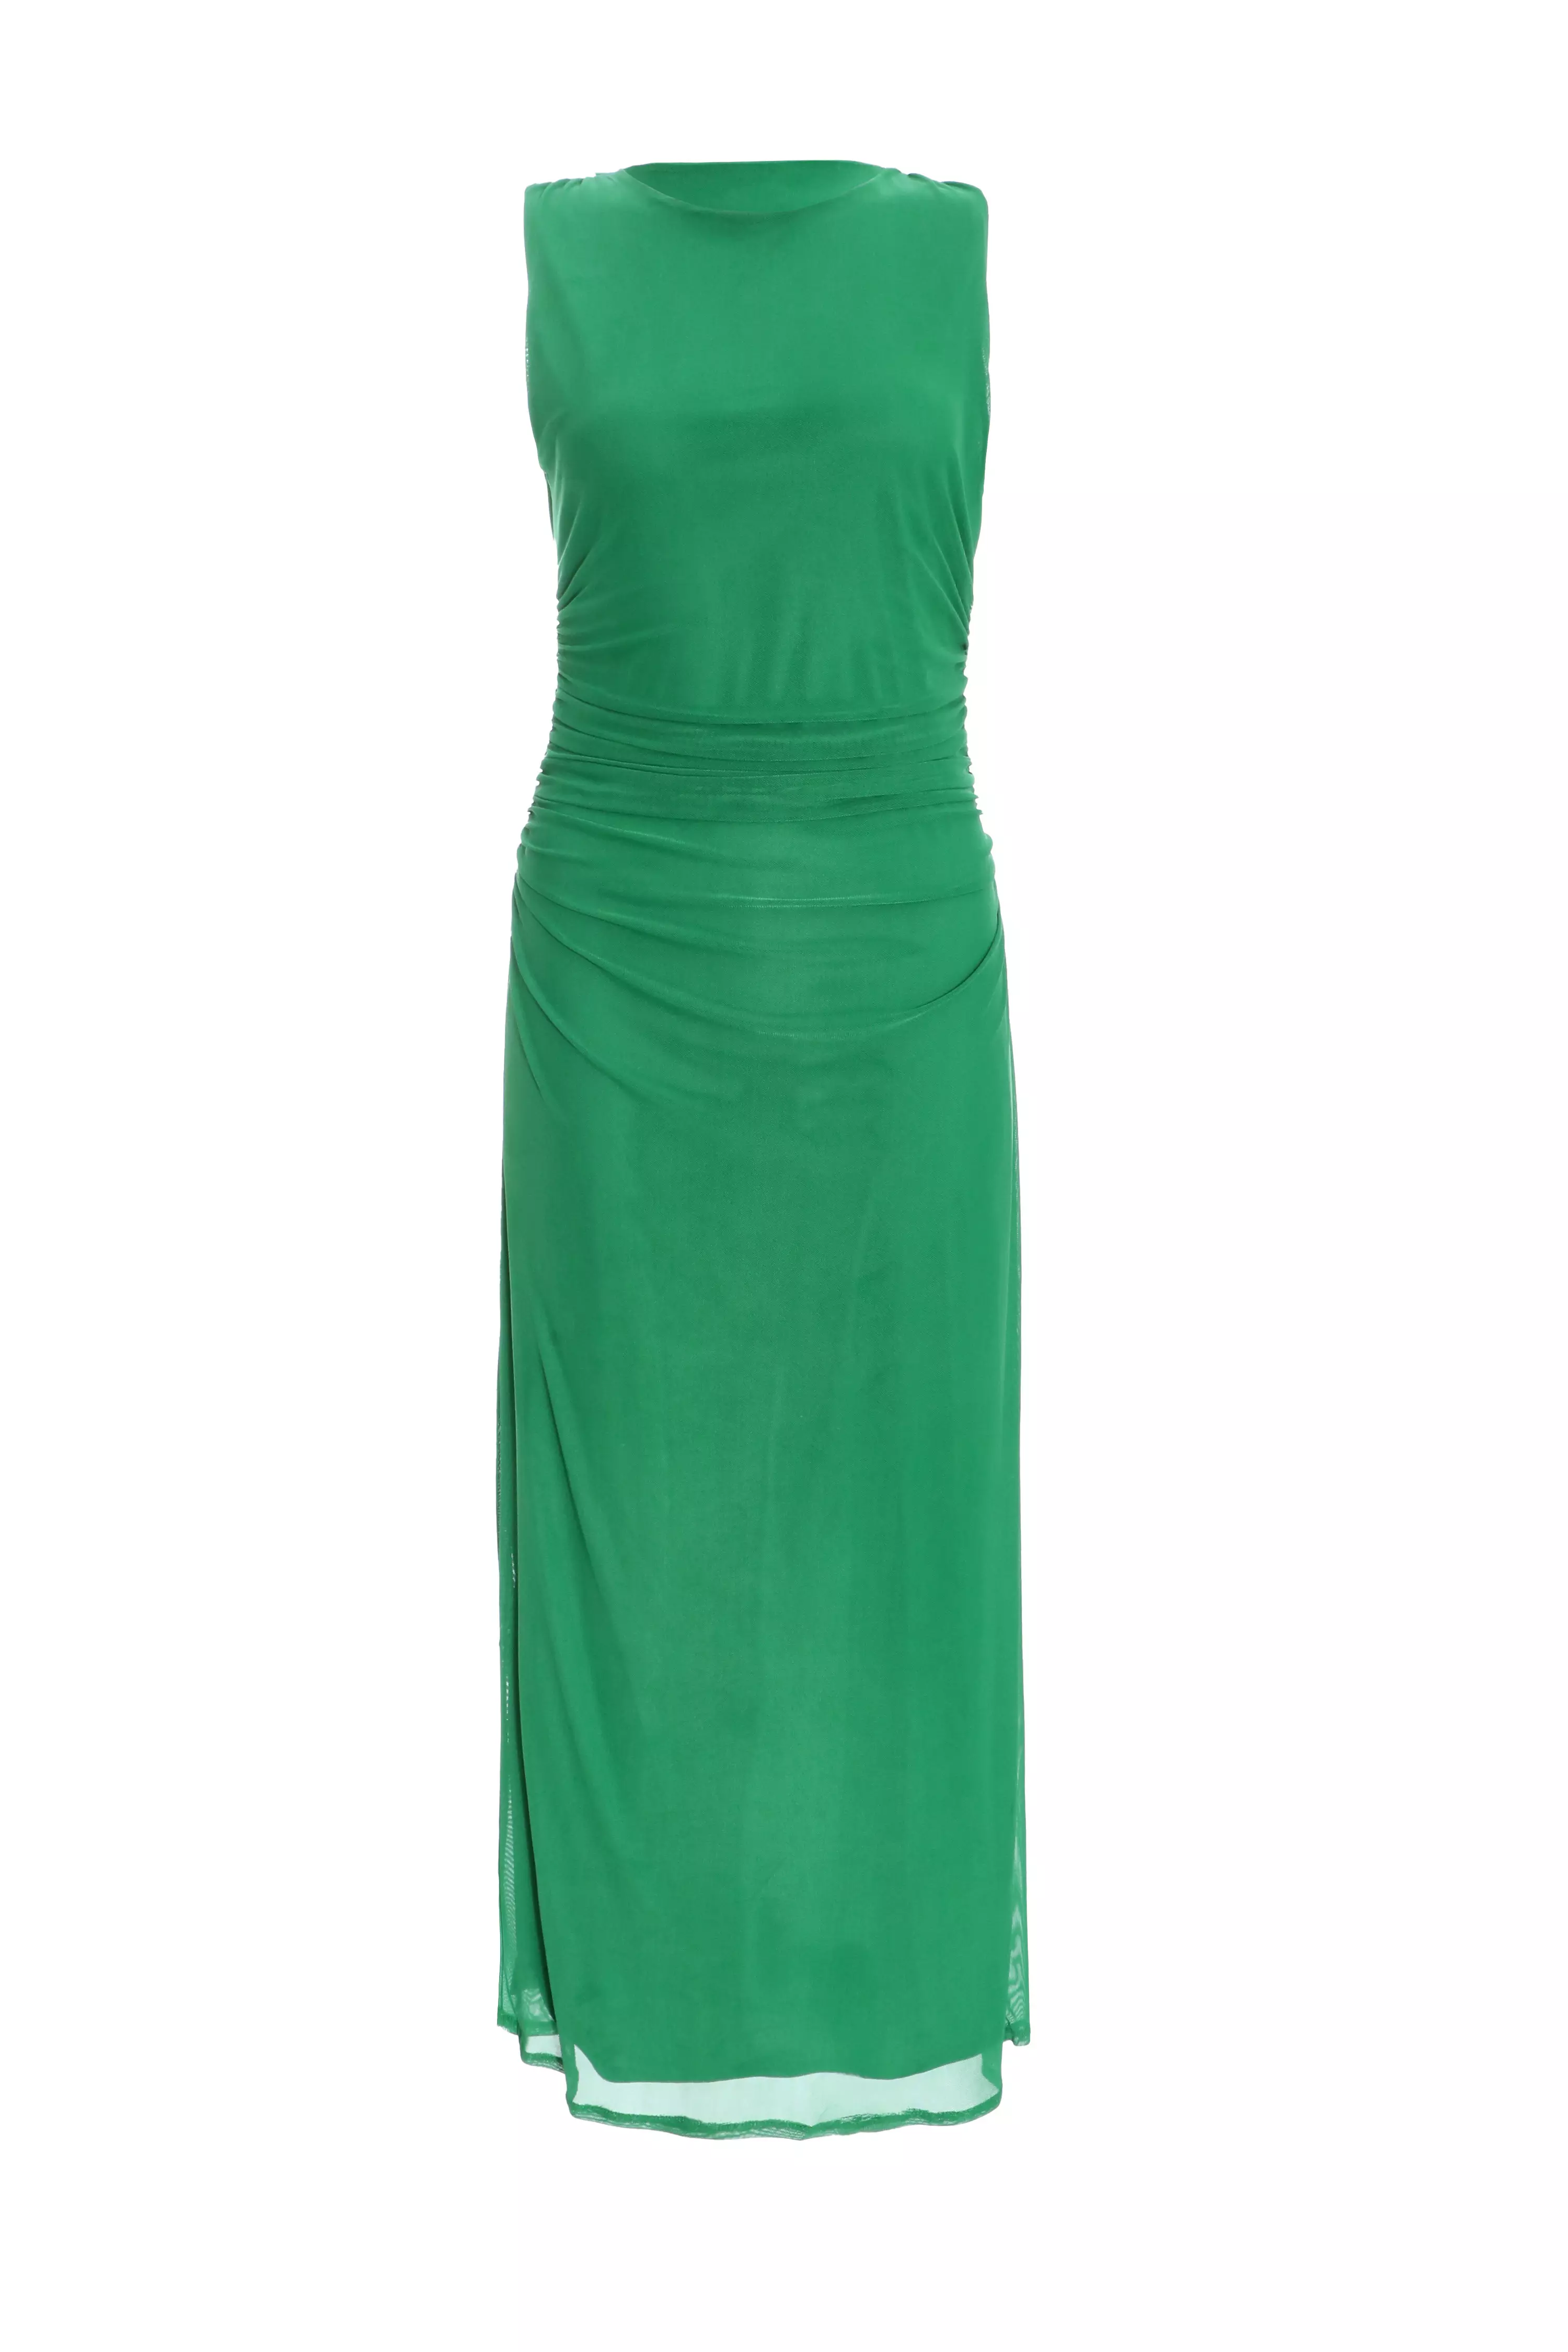 Green Mesh Ruched Bodycon Midaxi Dress